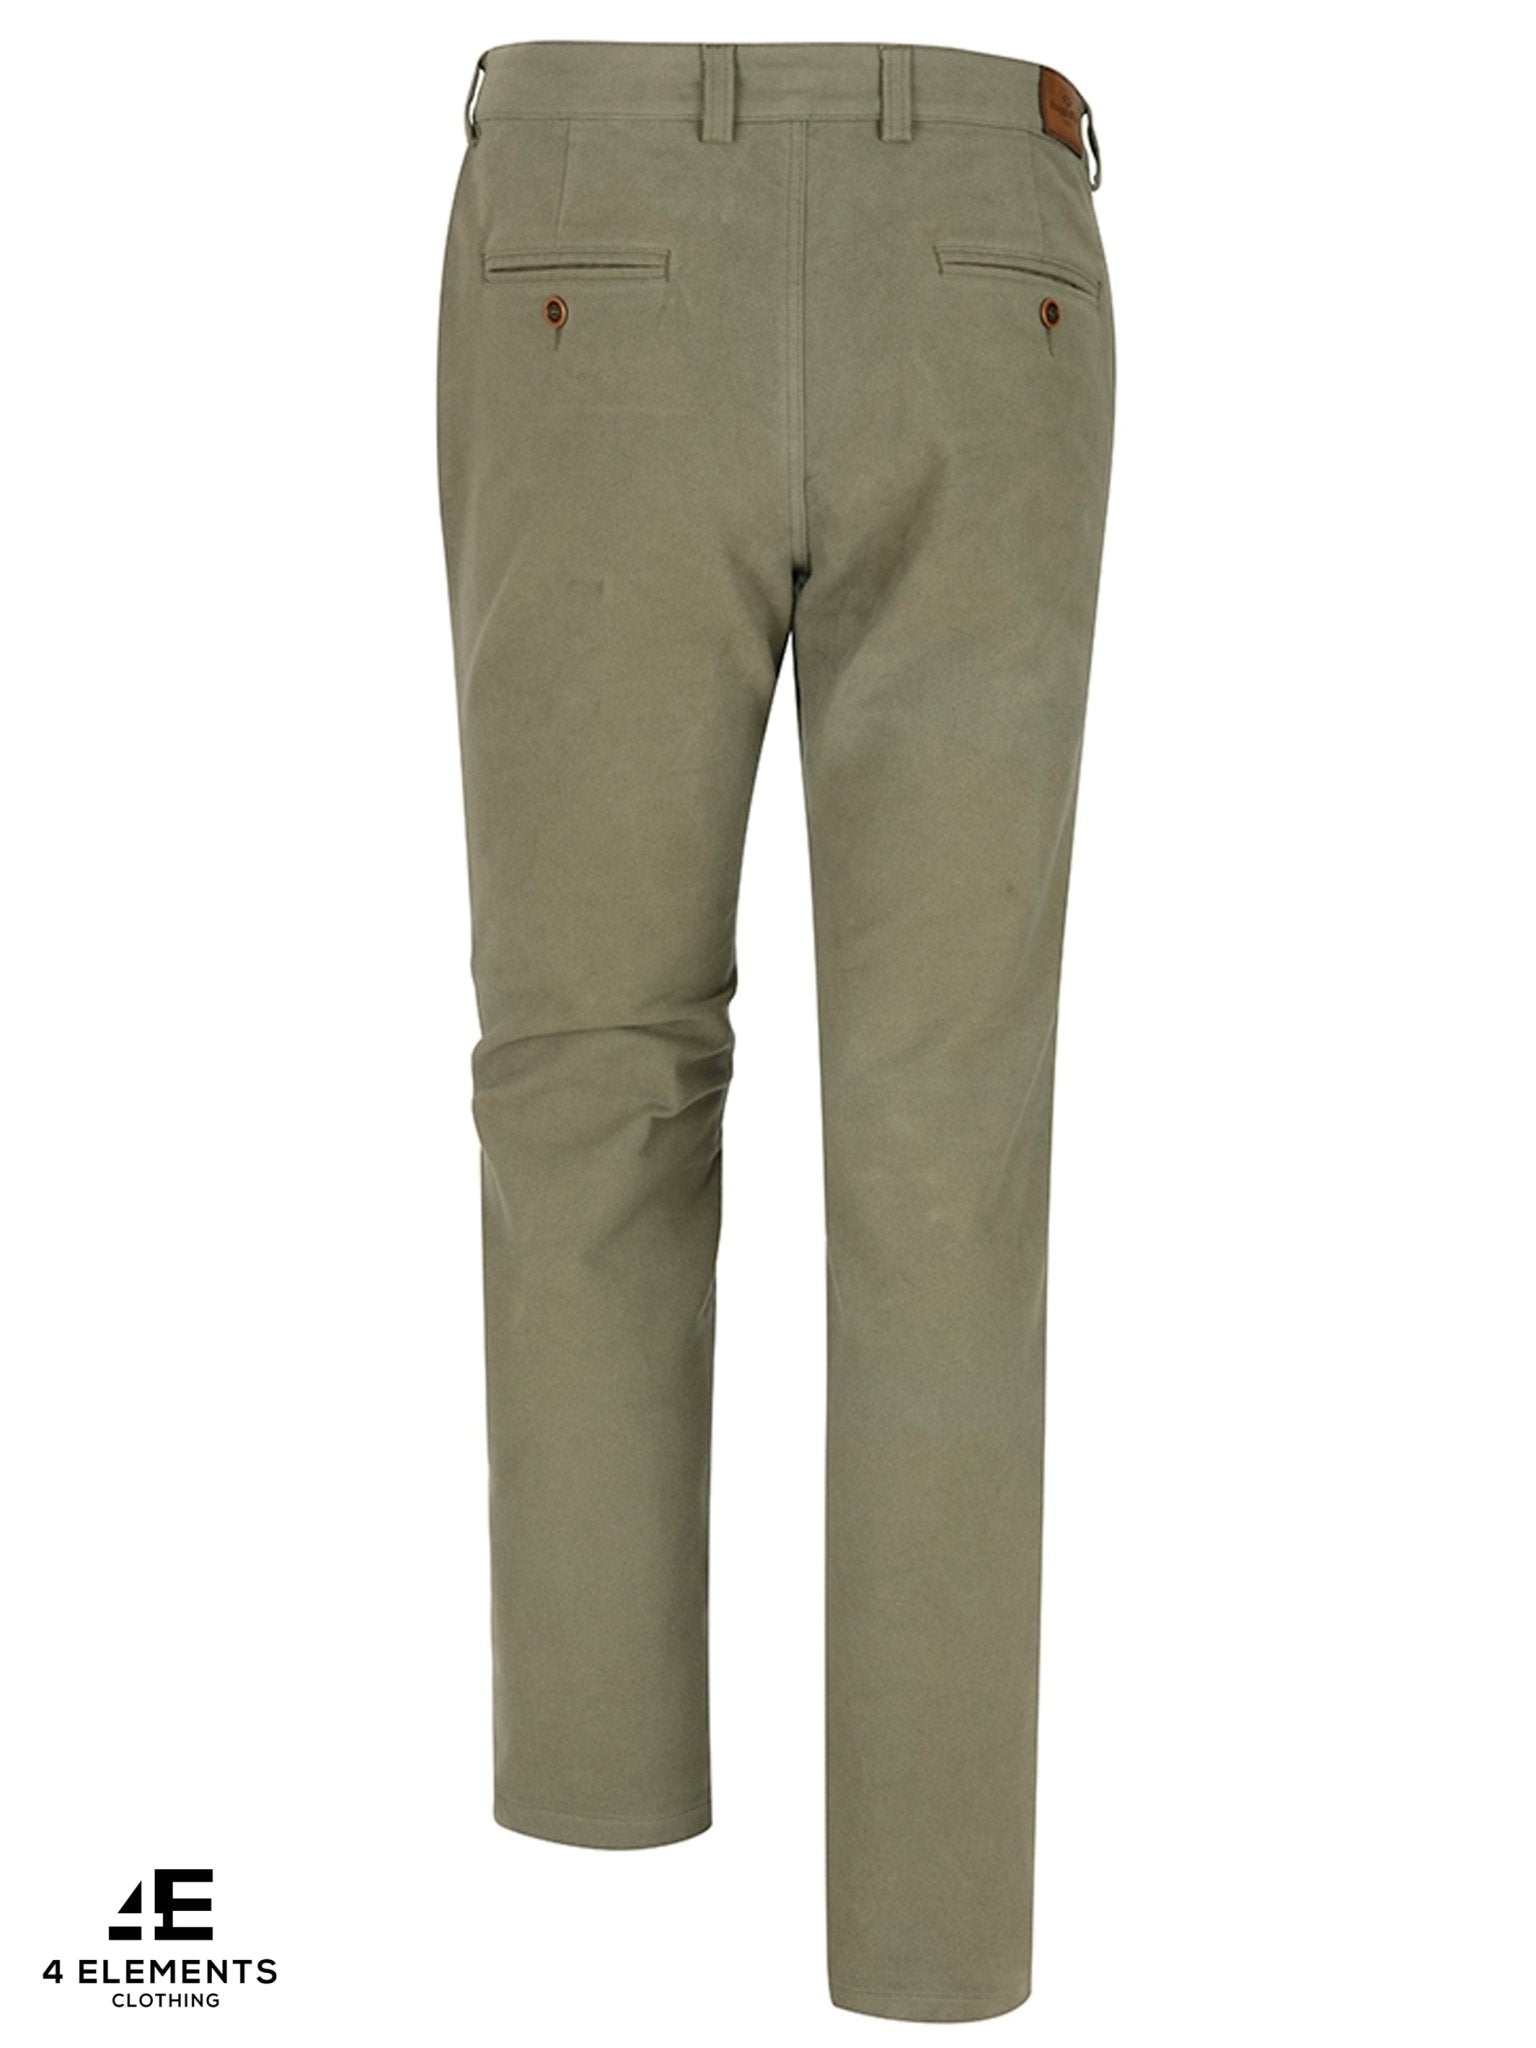 4elementsclothingHoggs of FifeHoggs of Fife - Moleskin Trousers Mens / country woven Cotton casual Trousers - Monarch IITrousers & JeansMMTR/LO/S30